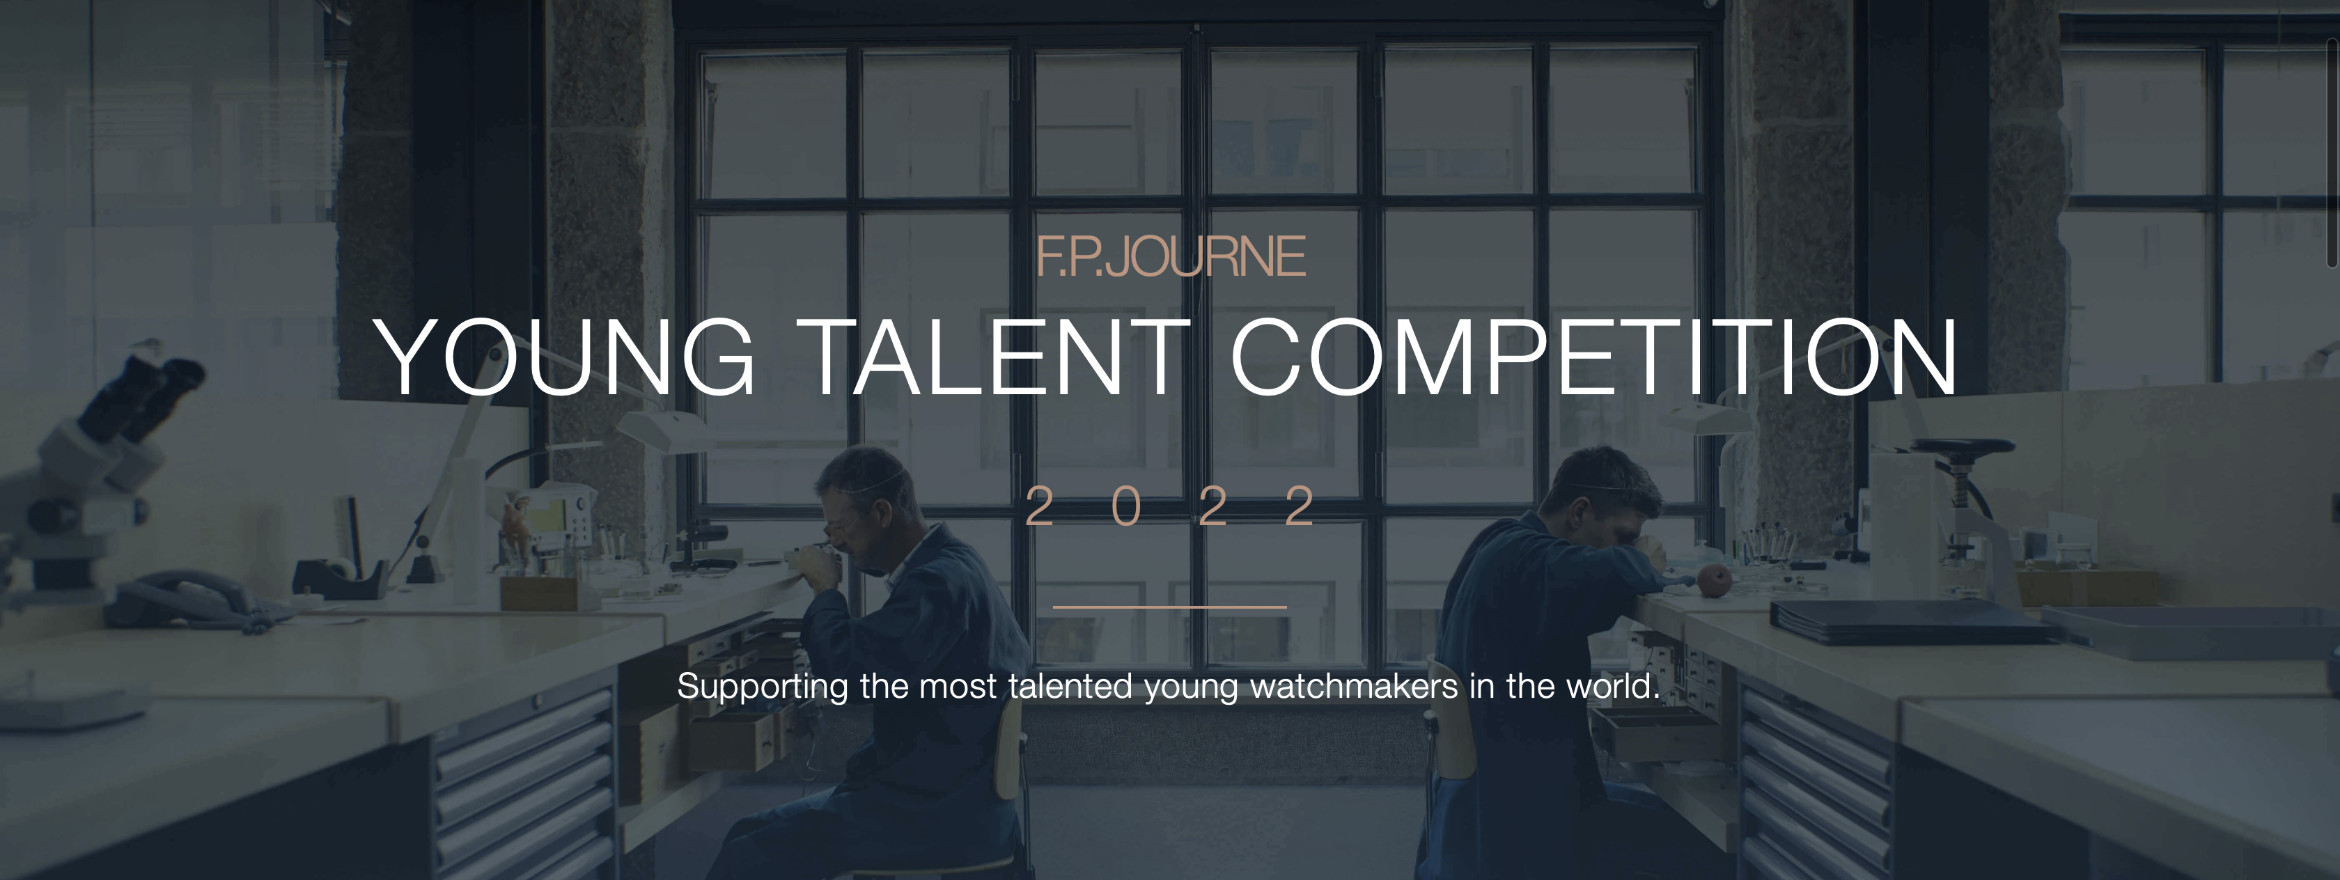 Open for Submissions – 2022 F.P. Journe Young Talent Competition